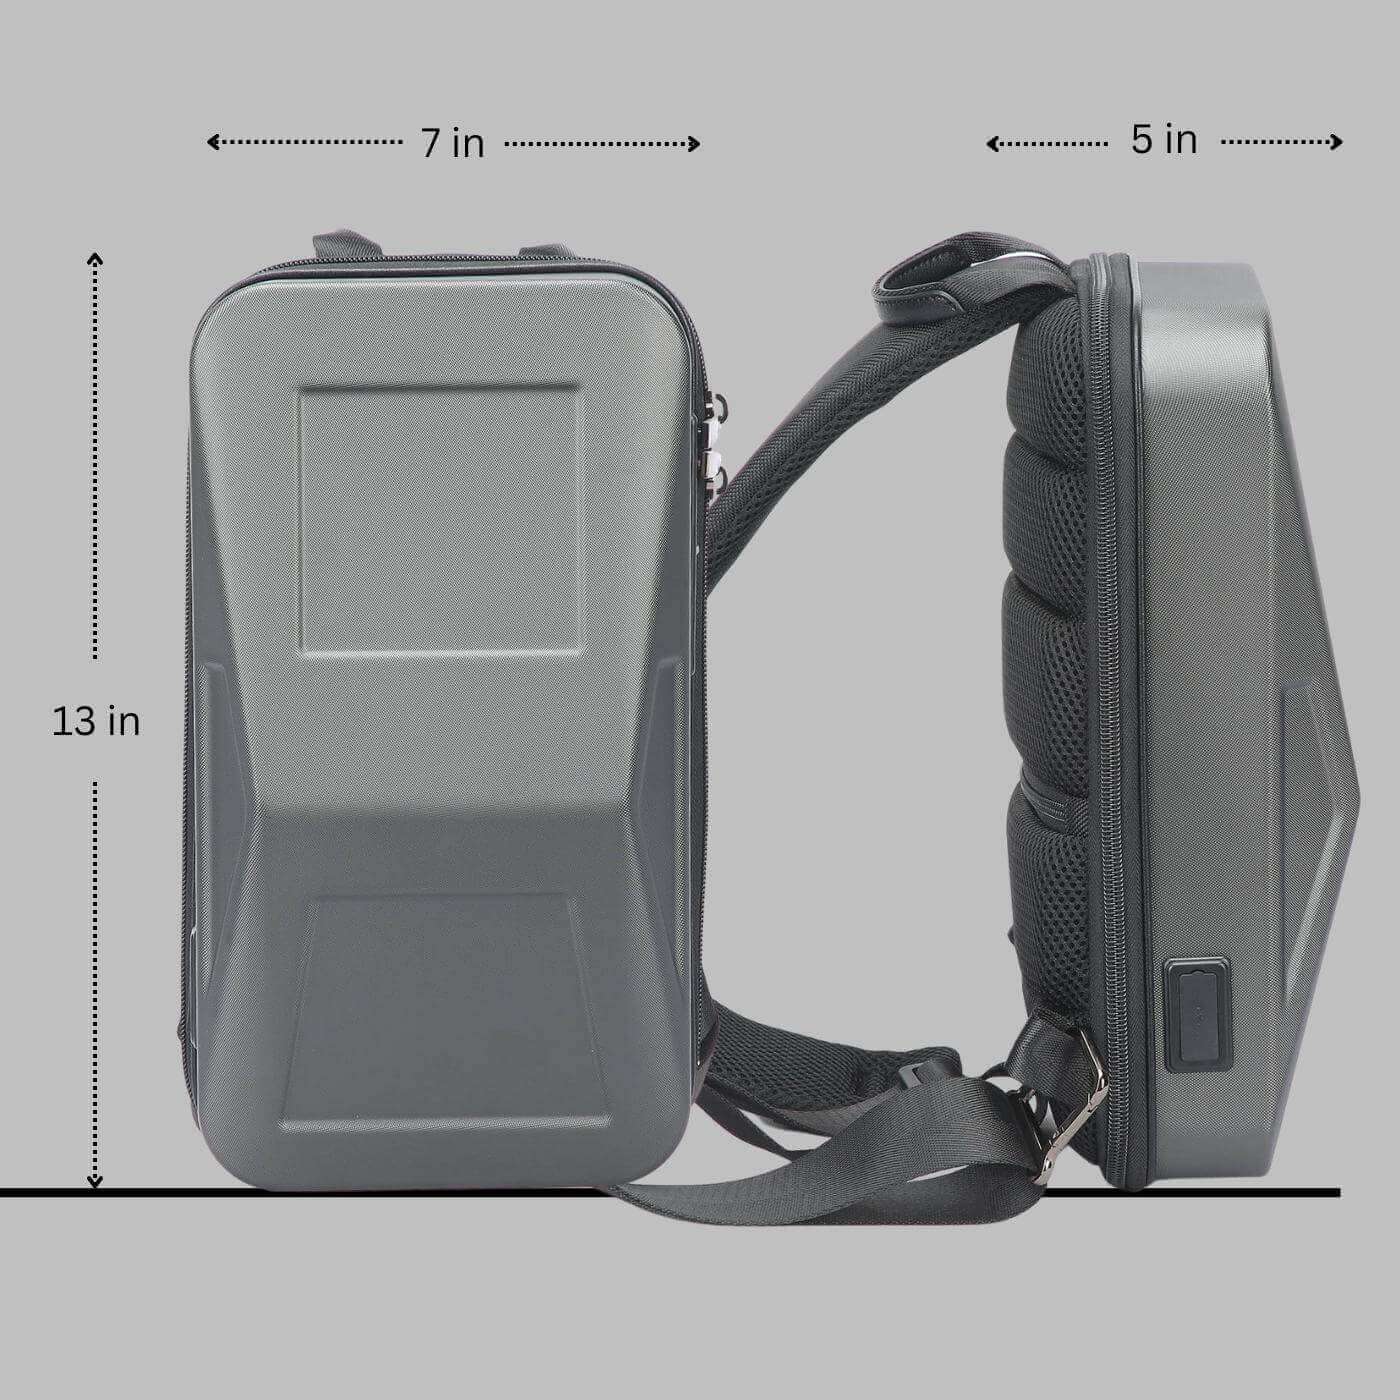 Stay Organized and On-the-Go with the Convenient and Versatile Cybersling